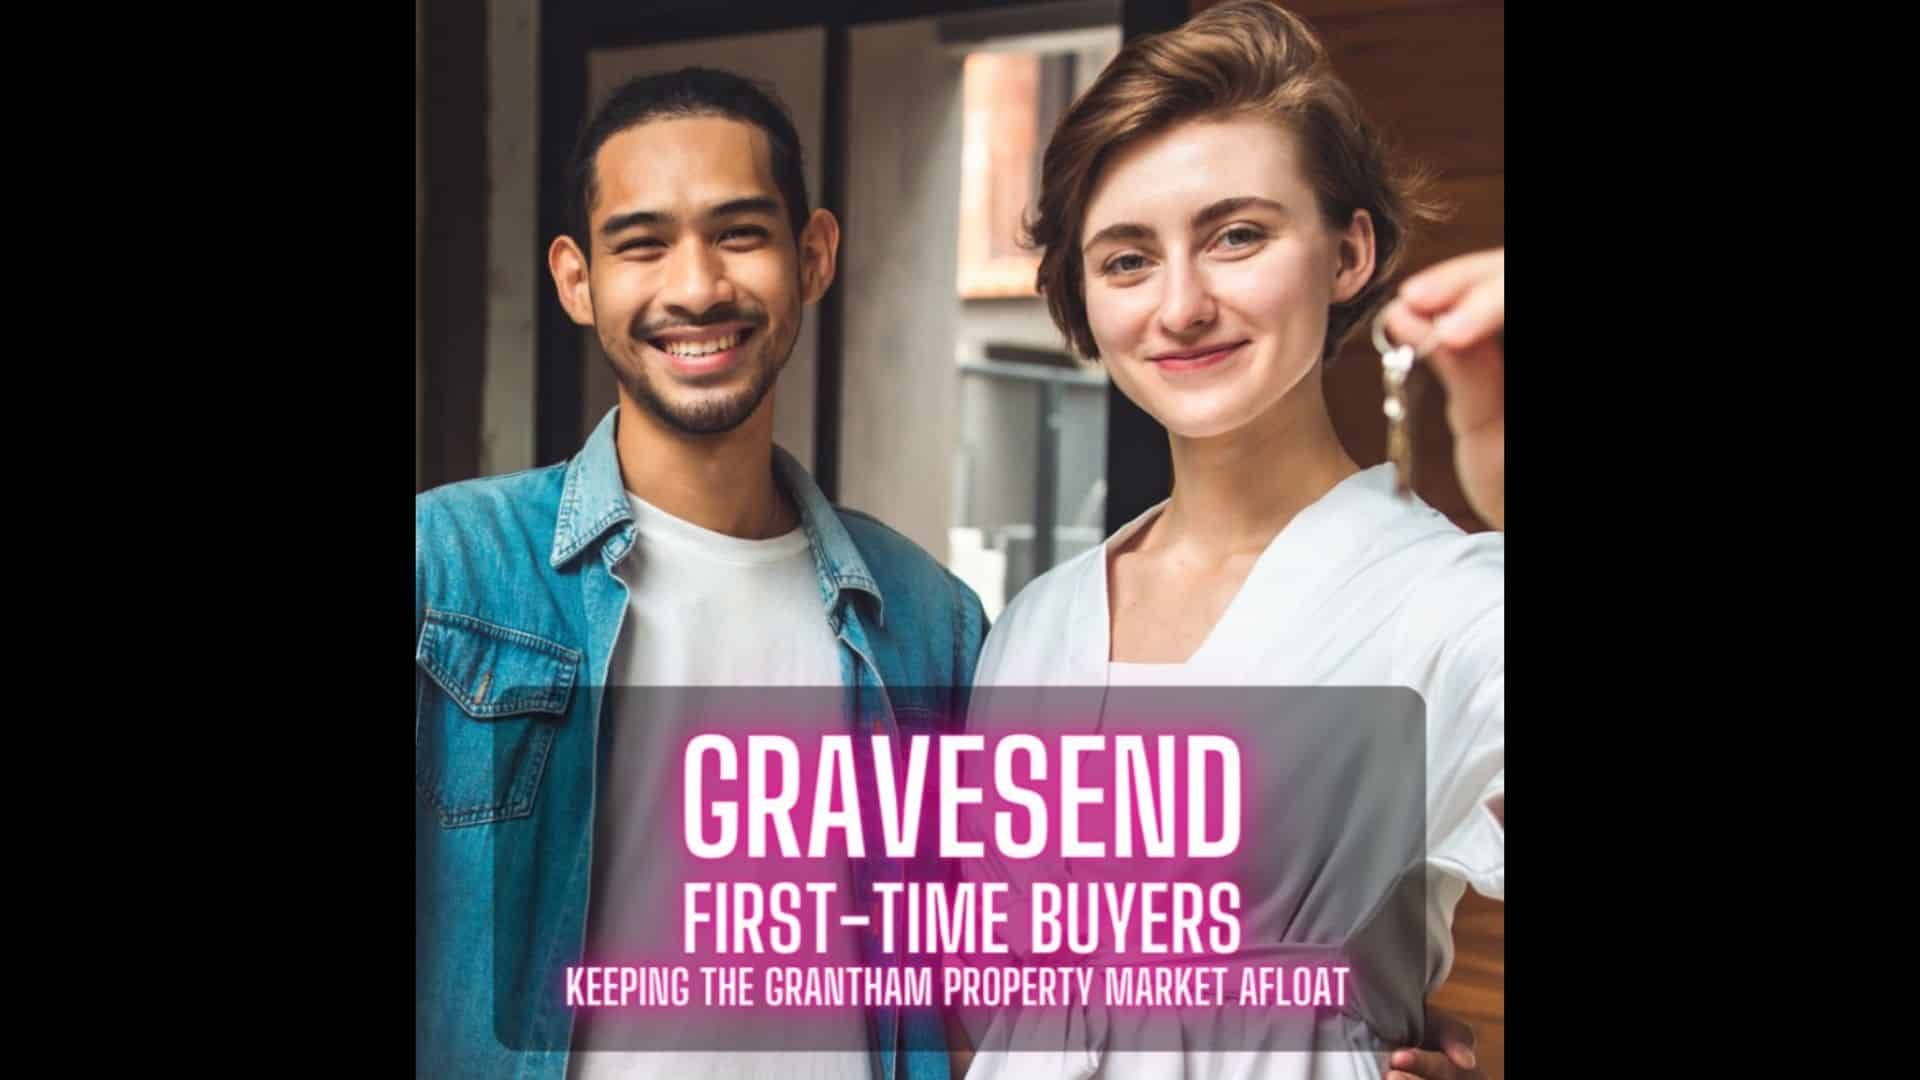 Gravesend First-Time Buyers Keeping Our Local Property Market Afloat